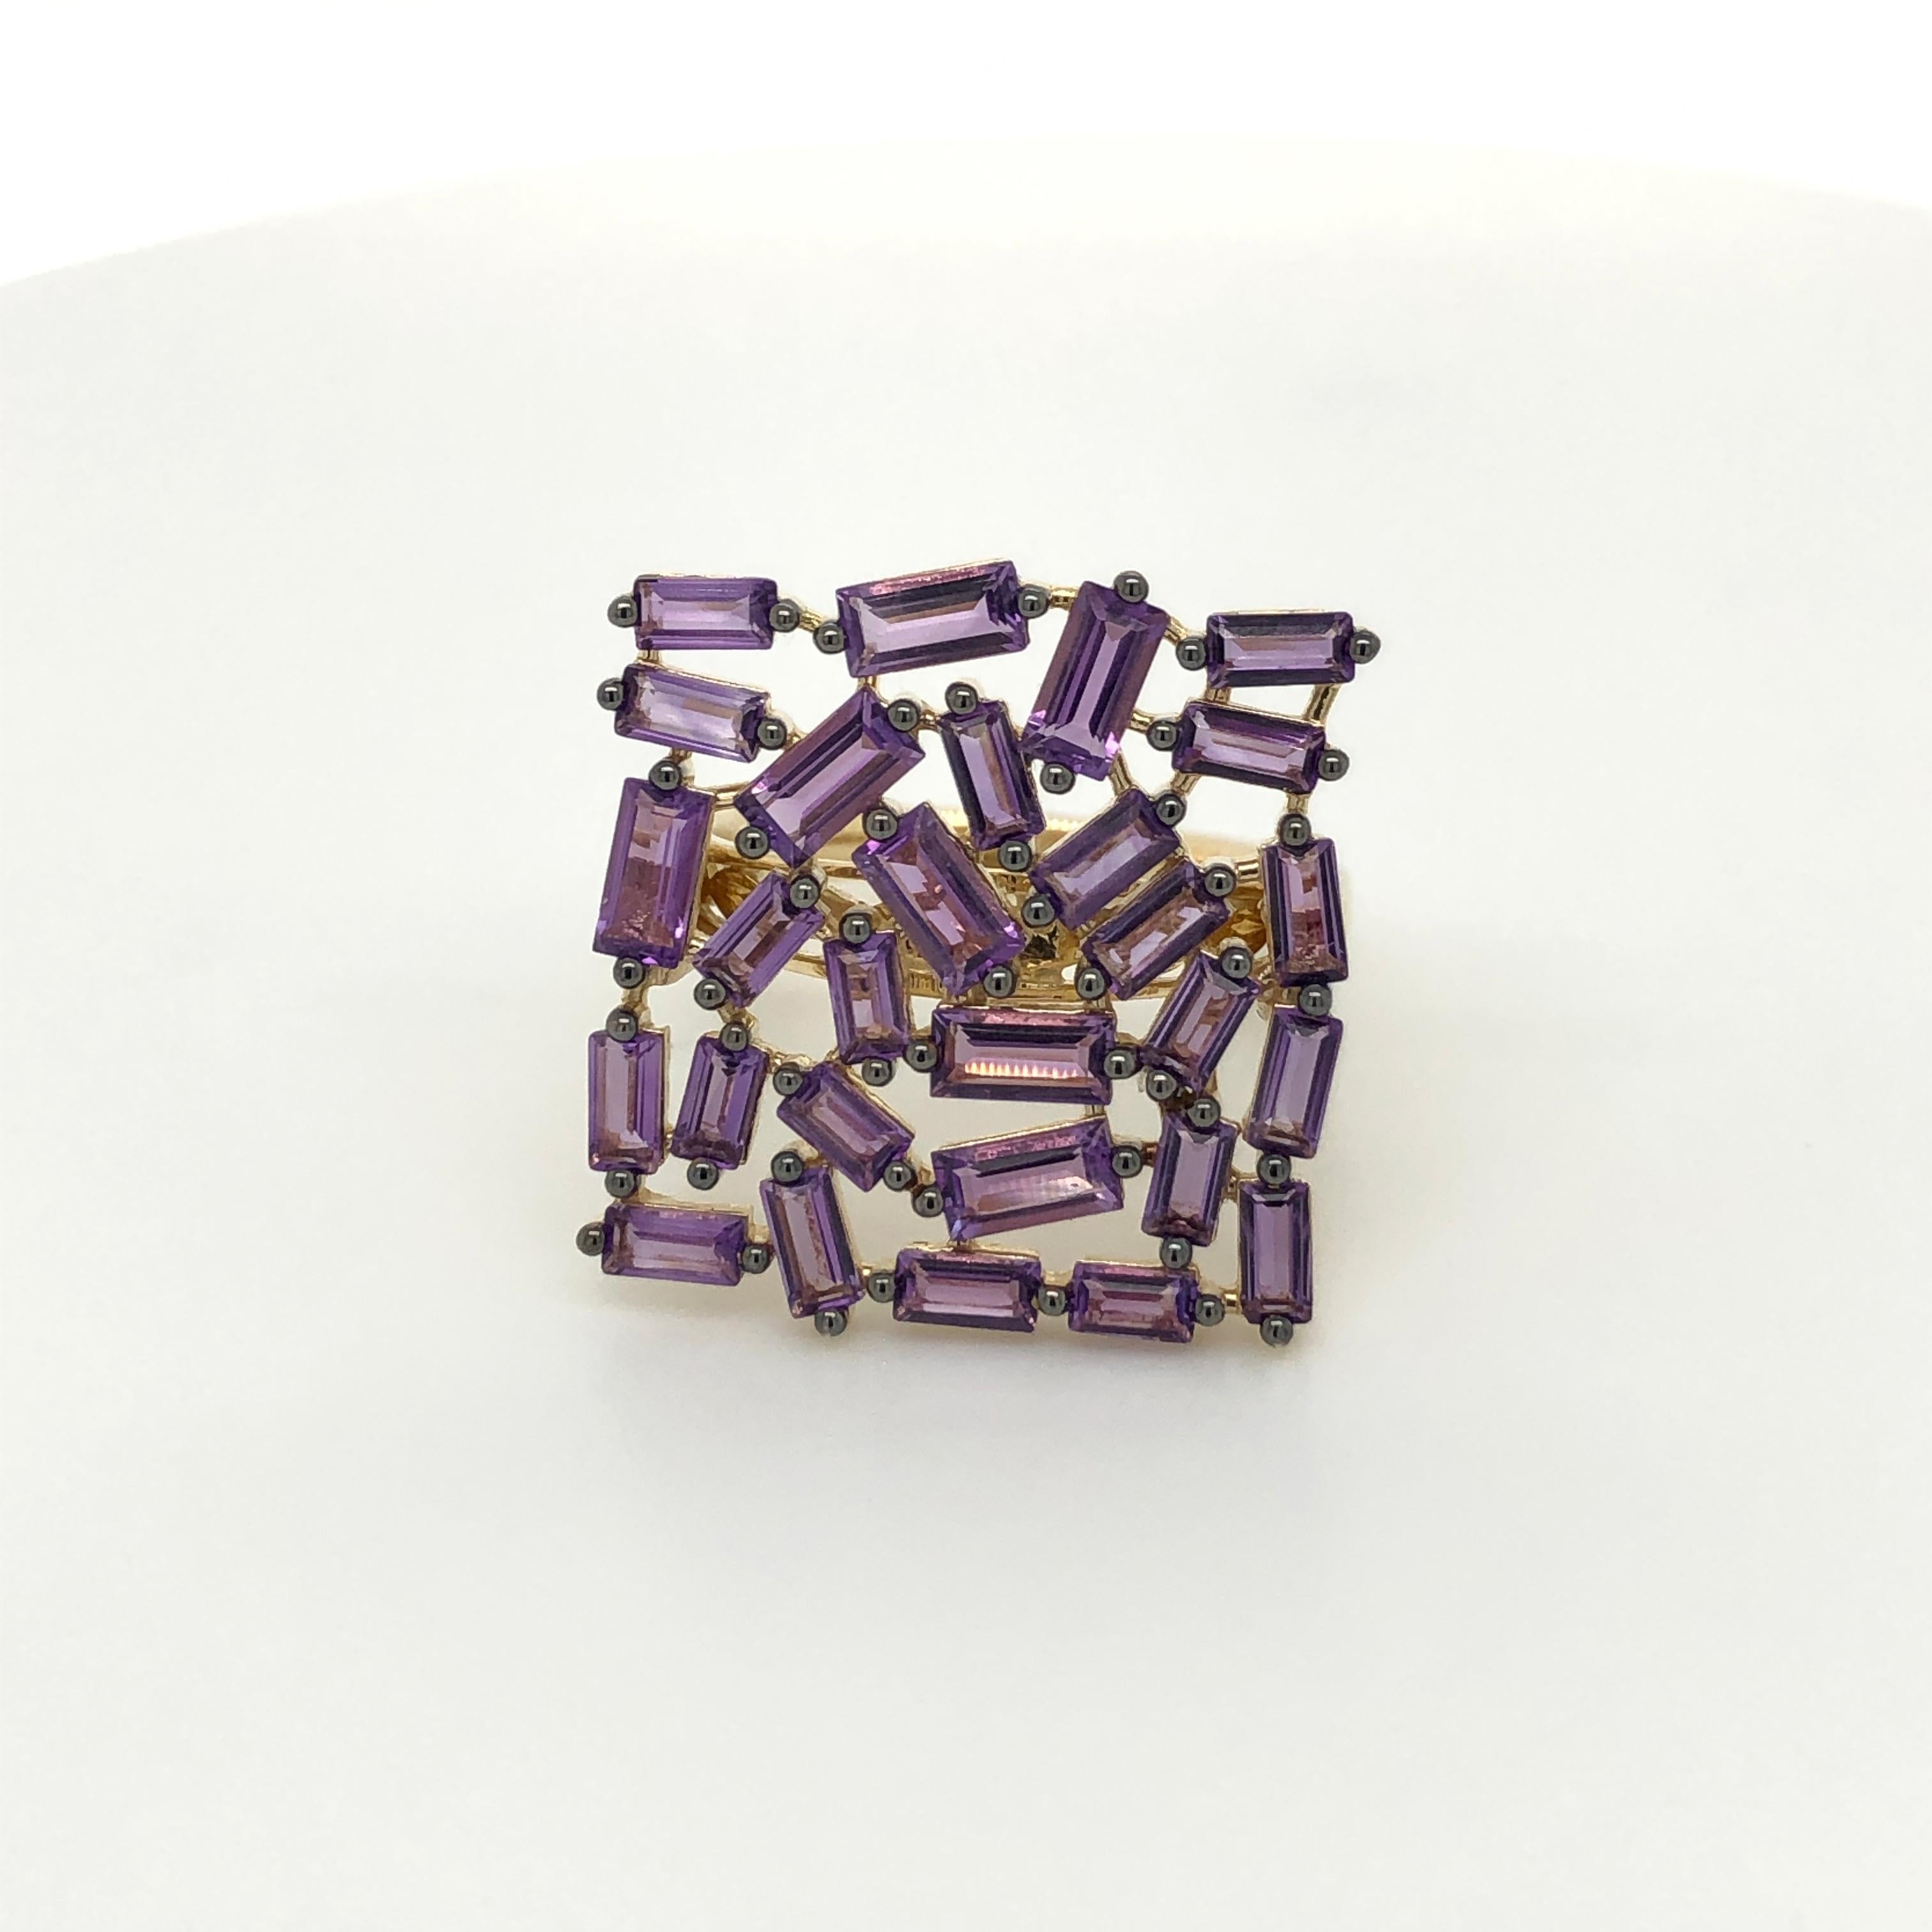 Le Vian adds a modern touch to the baguette with innovative arrangements of baguette gems into a frenetic design called Baguette Frenzy.  The 14k yellow gold ring shown here, features 28 baguette-shaped Amethyst (2-7/8 ct t.w.) in varying shades